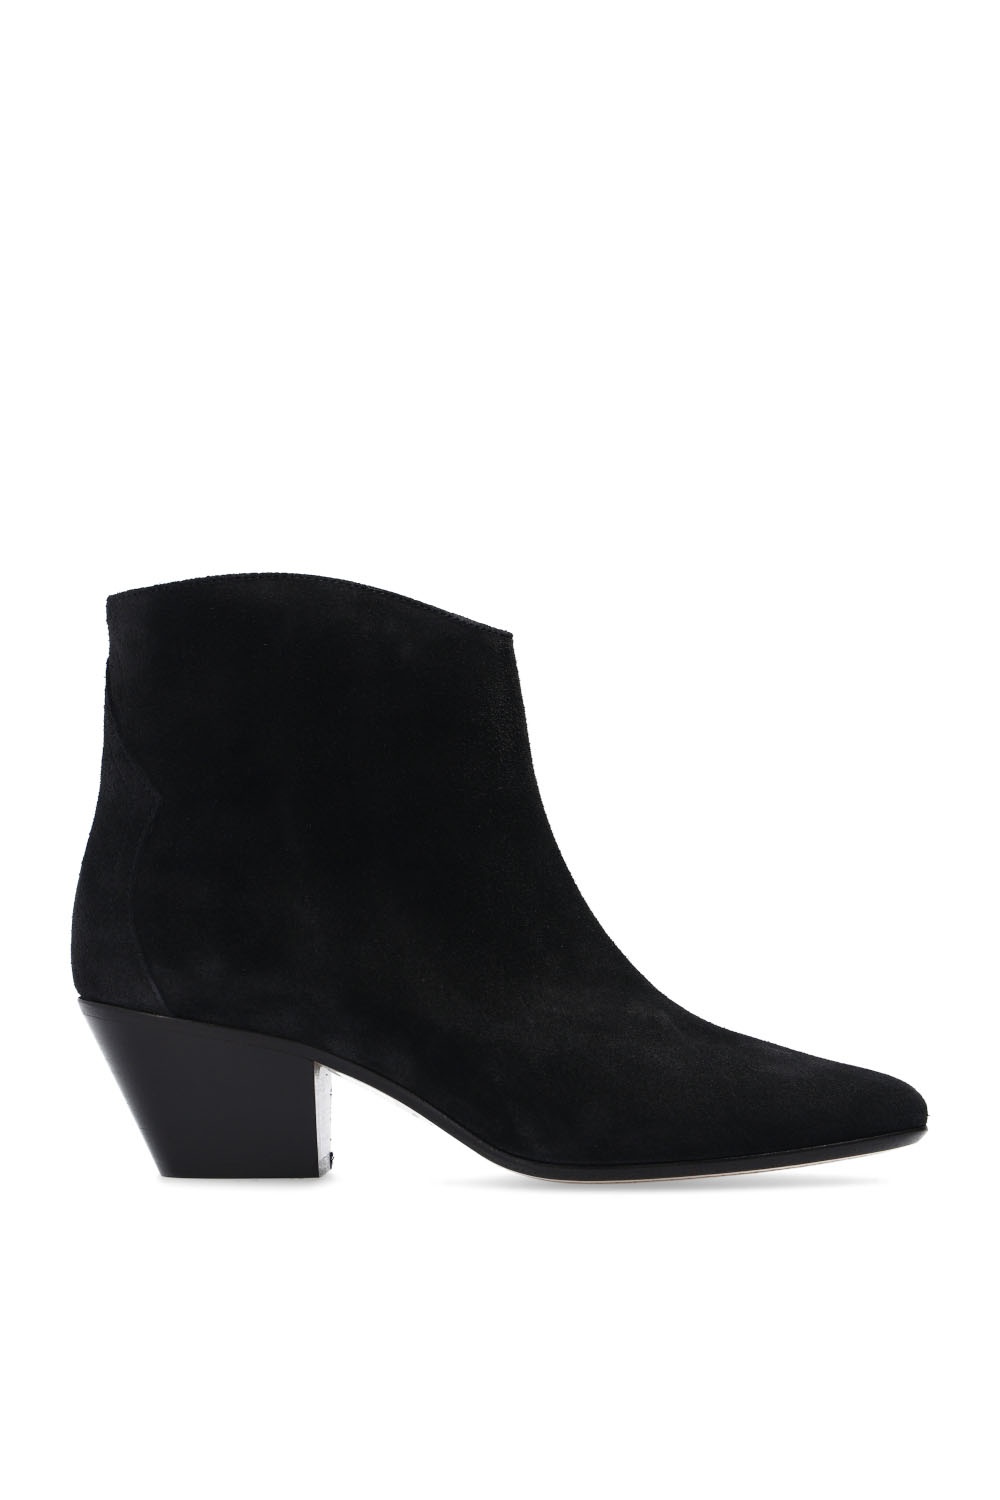 Isabel Marant ‘Dacken’ suede ankle boots